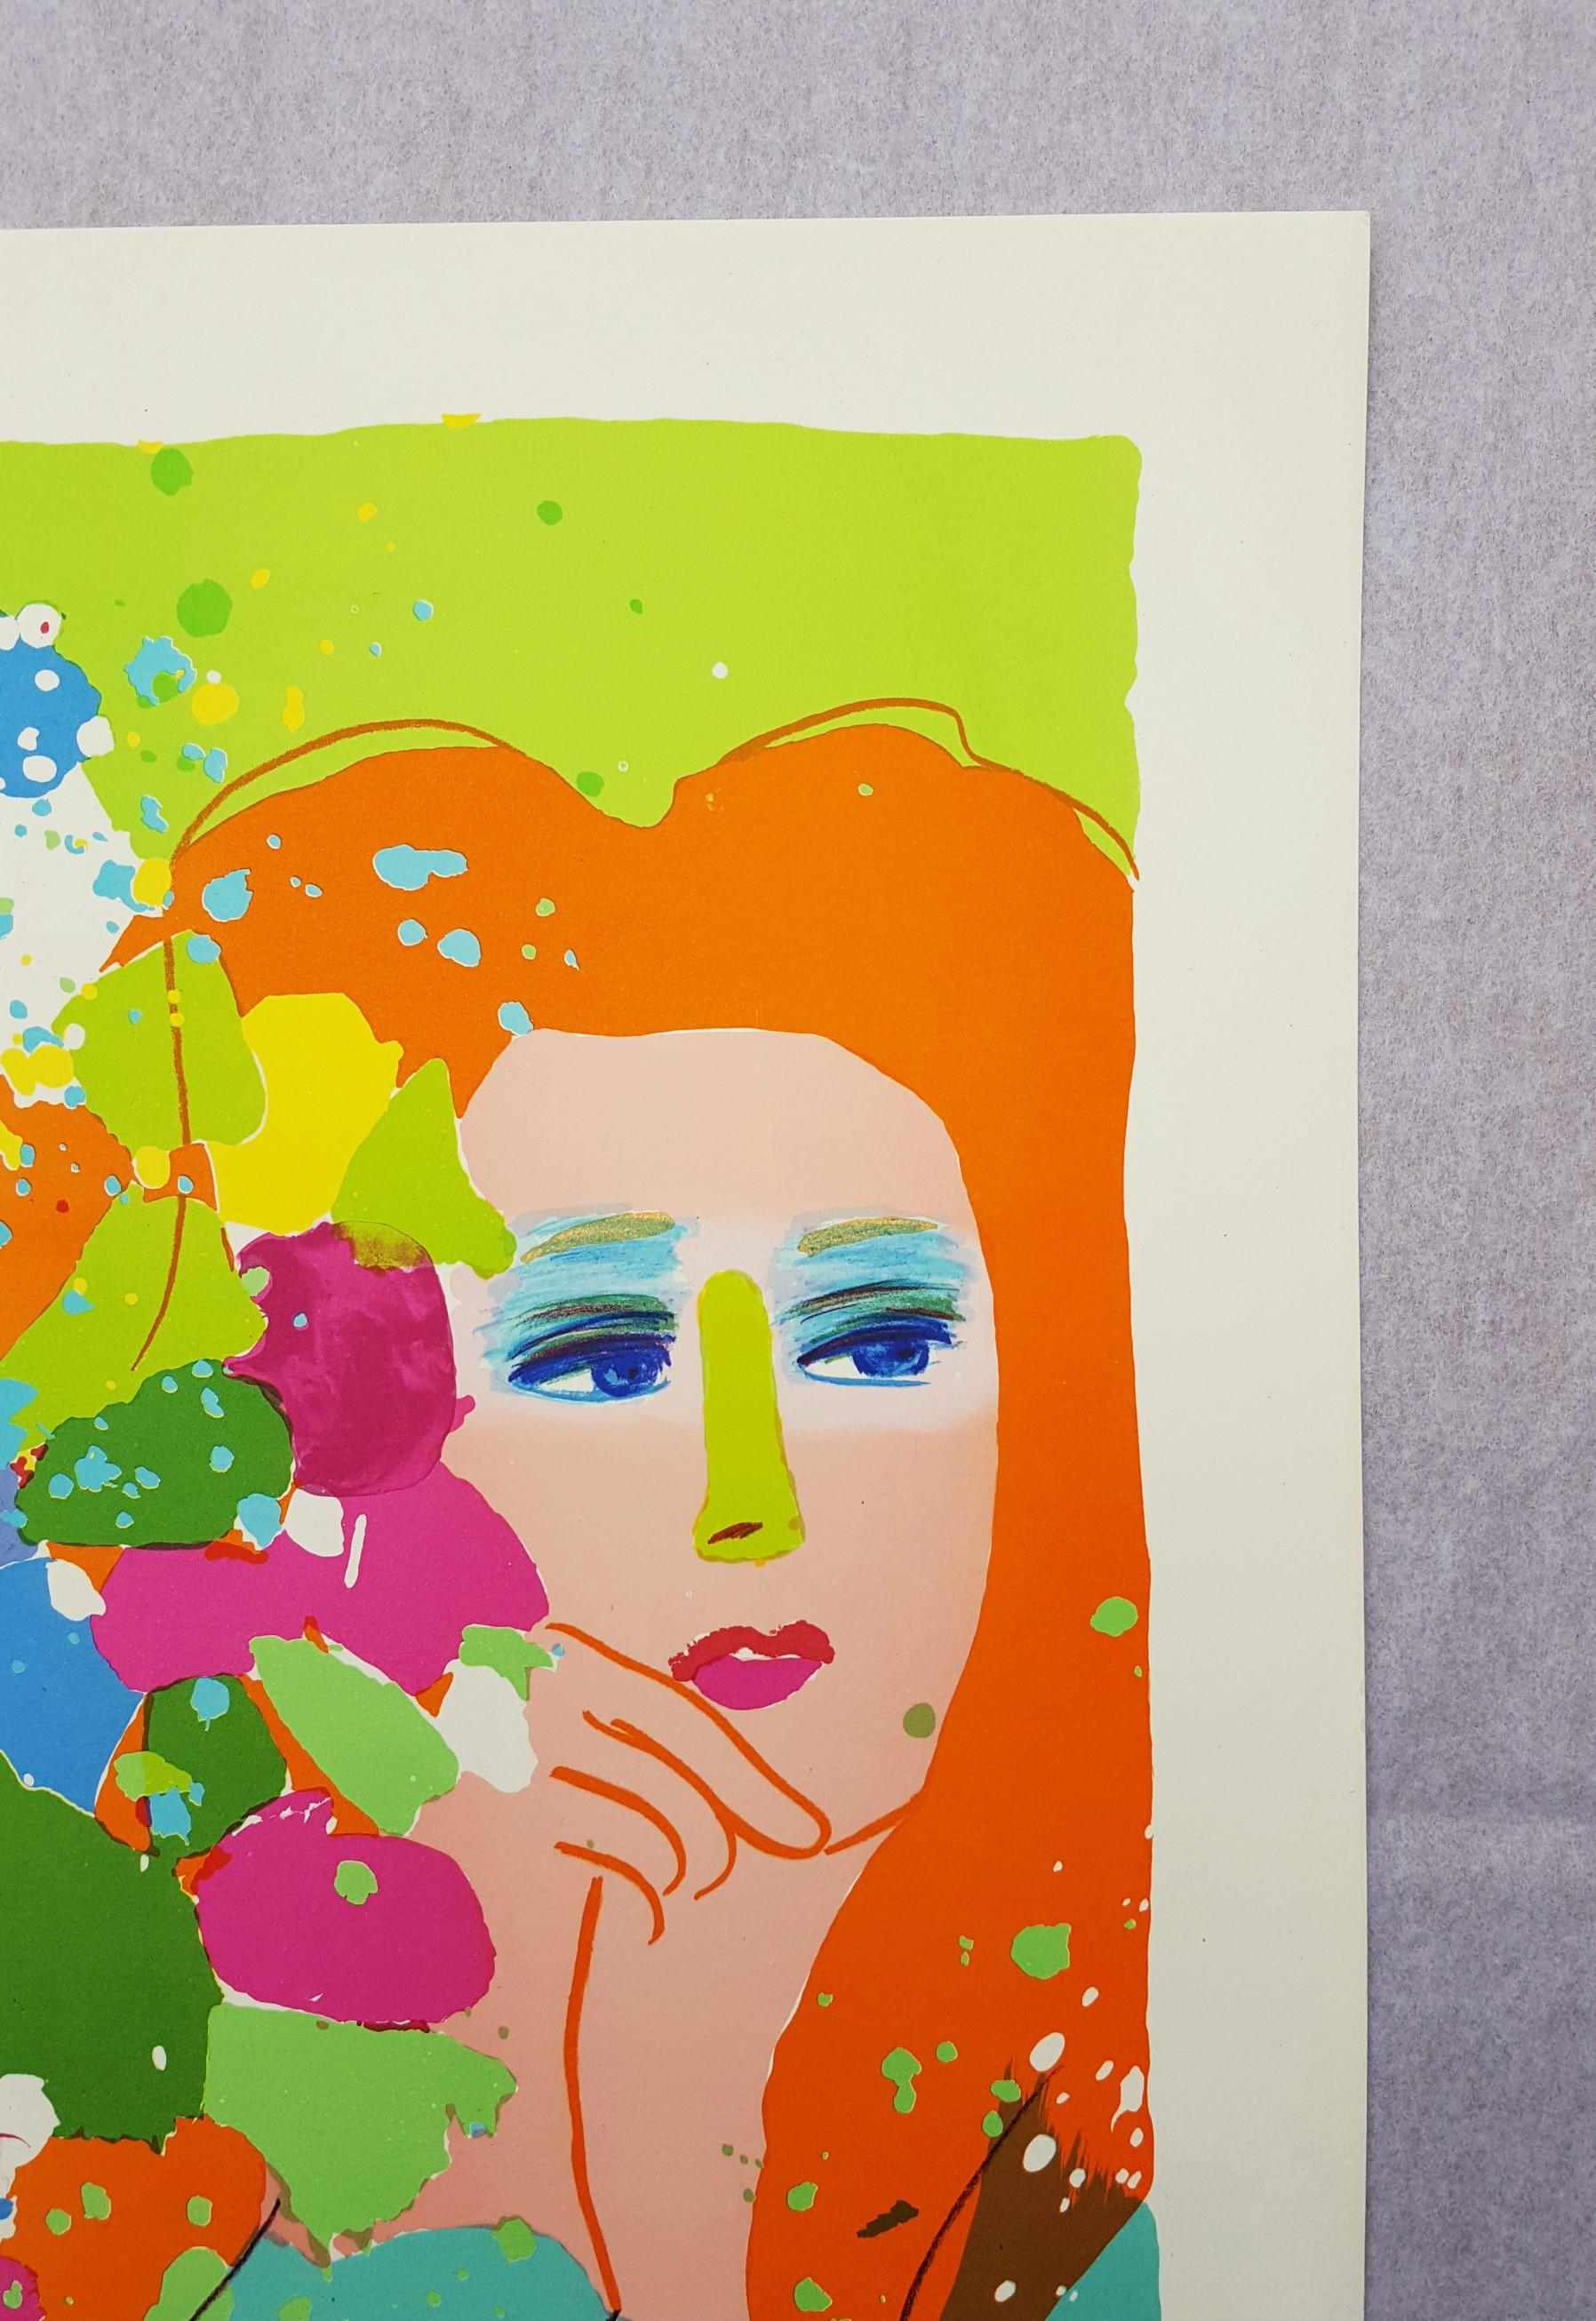 Lady with Flowers /// Pop Art Walasse Ting Buntes Mädchen Abstrakte Lithographie Kunst im Angebot 5